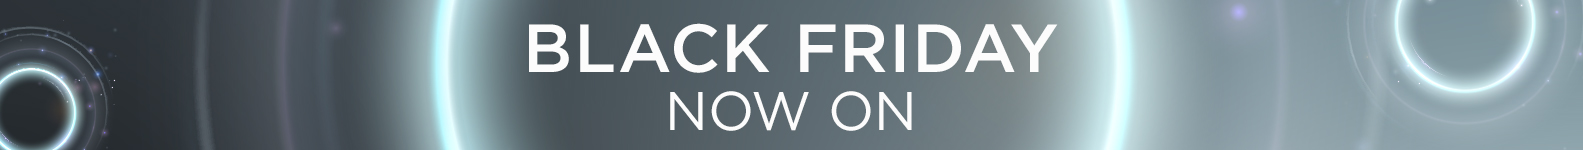 Wex Black Friday Offers